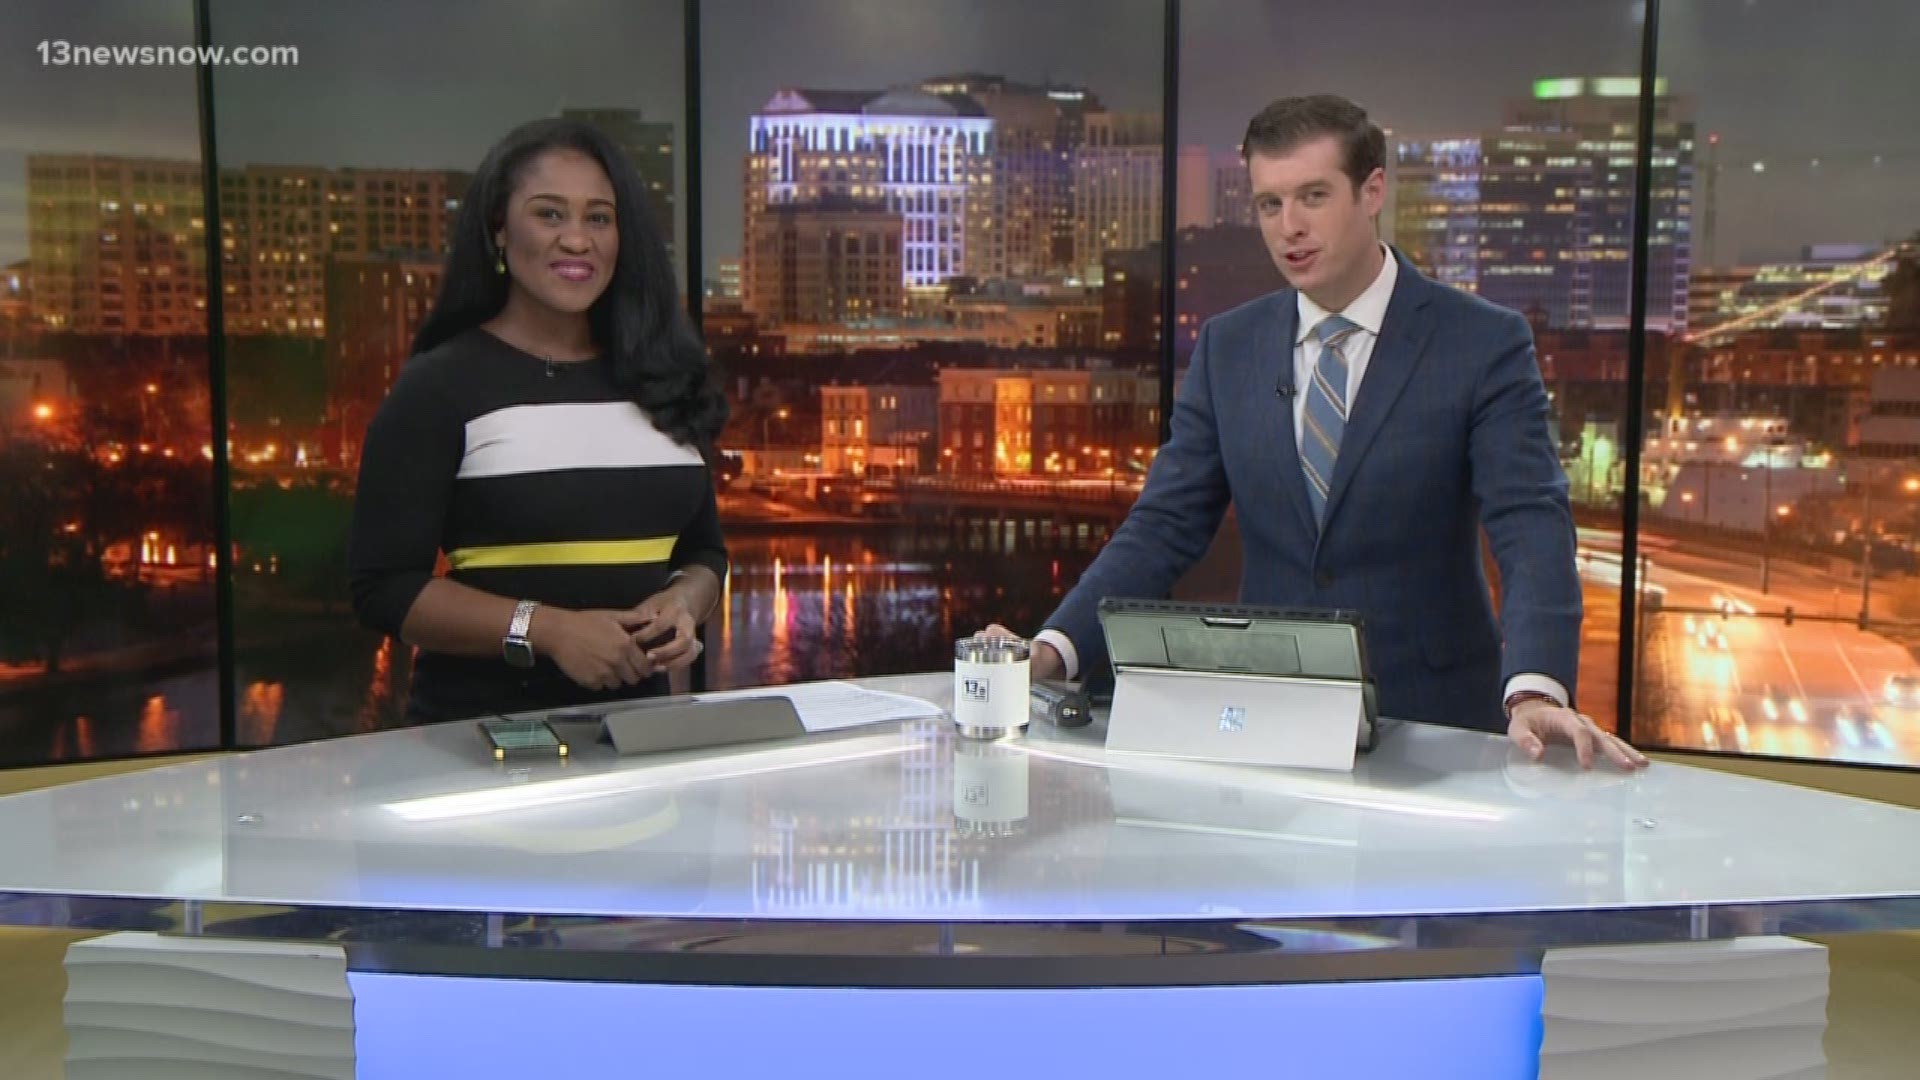 Top stories from 13News Now Daybreak with Ashley Smith and Dan Kennedy